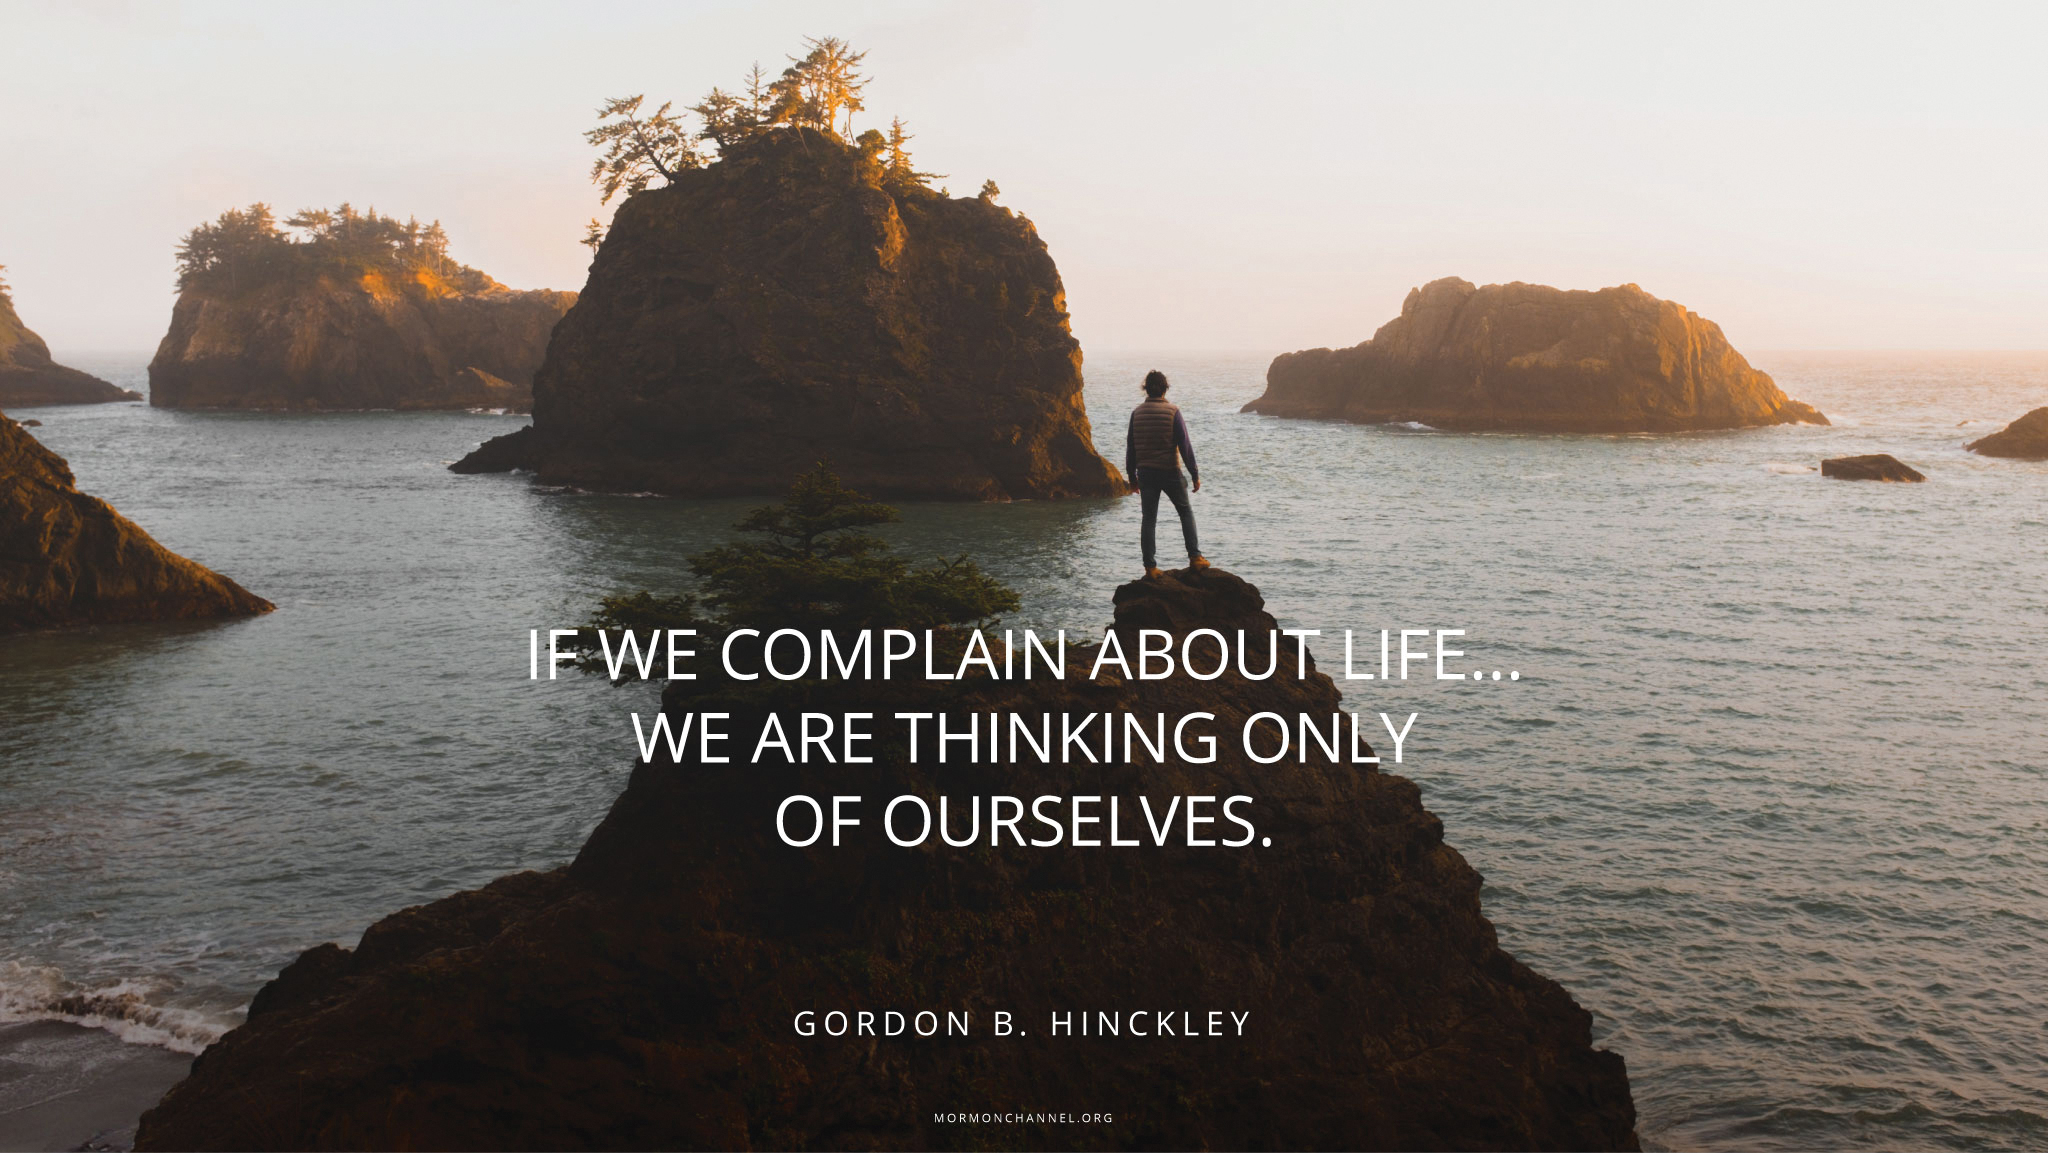 A man overlooking a bay dotted with islands, with a quote by President Gordon B. Hinckley: “If we complain about life … we are thinking only of ourselves.”